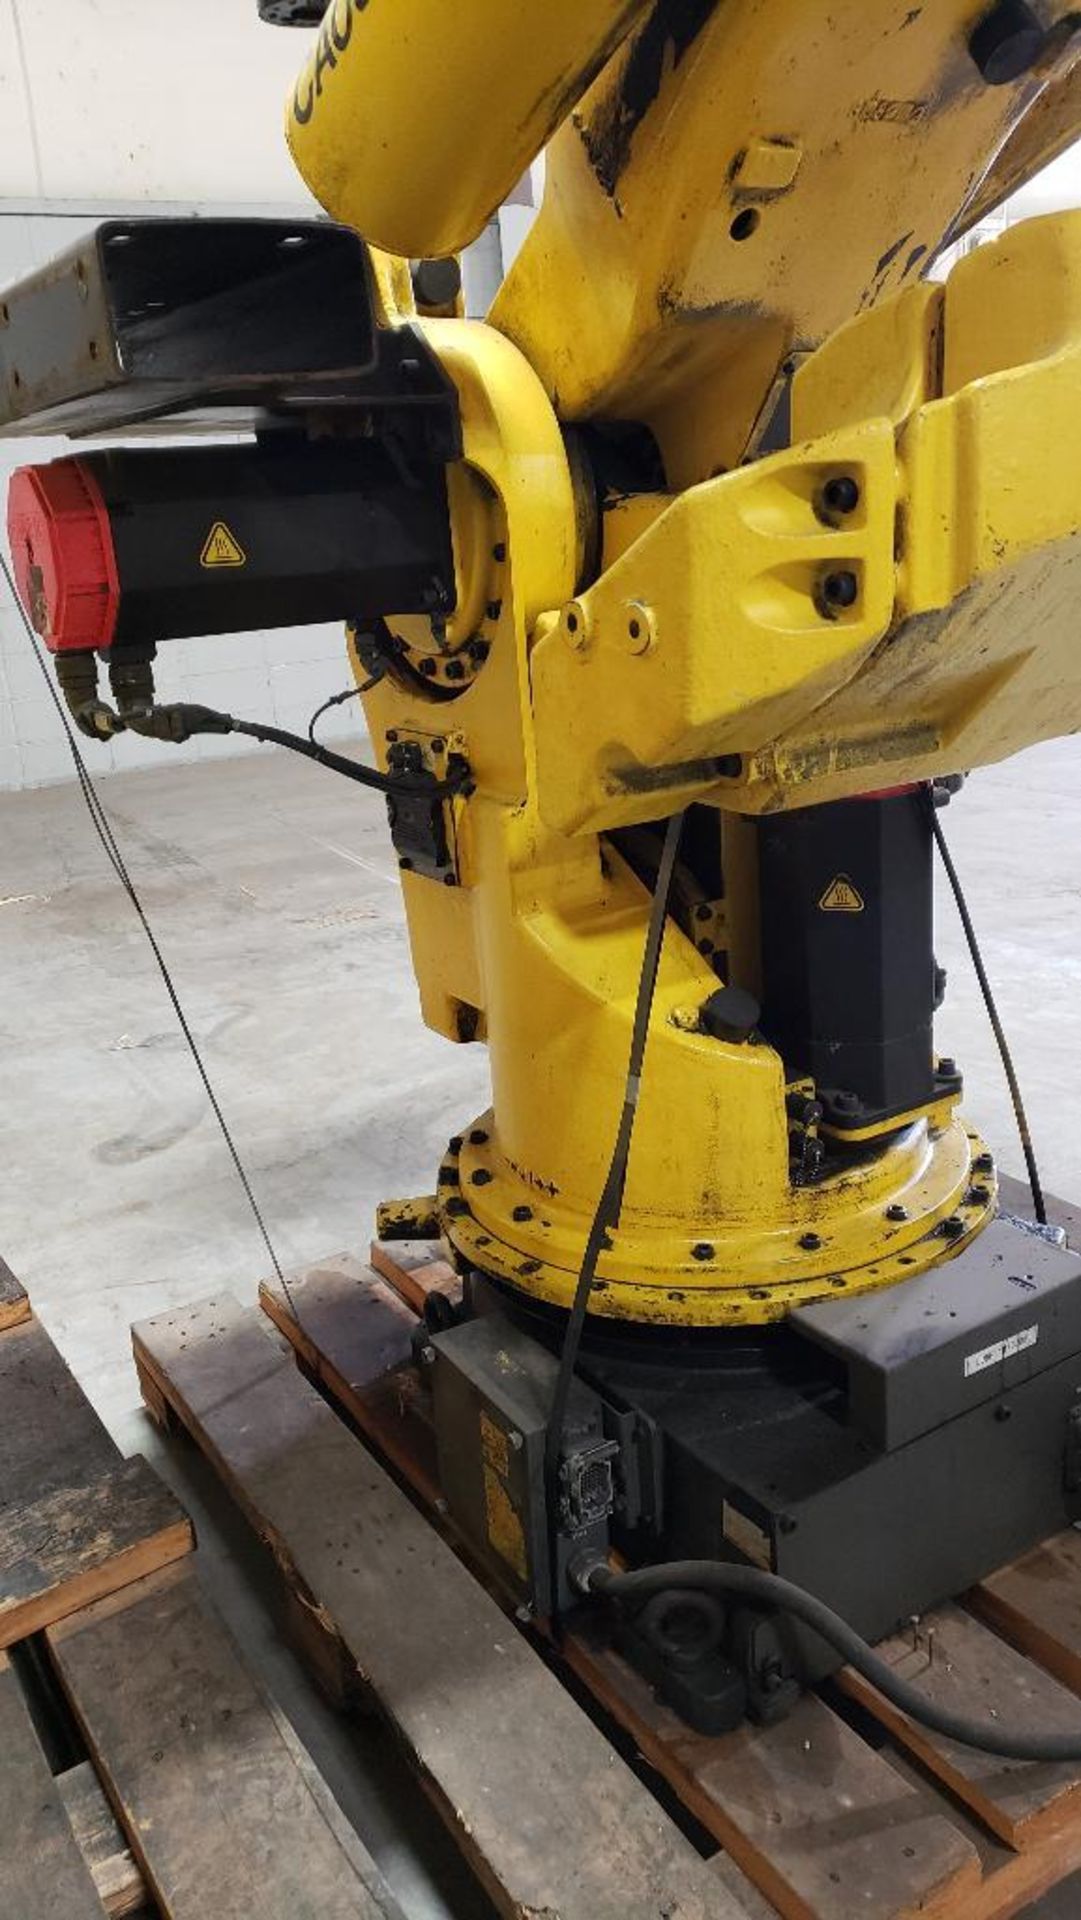 (Parts/Repairable) Fanuc S-420iW robot 6-axis arm. - Image 7 of 8